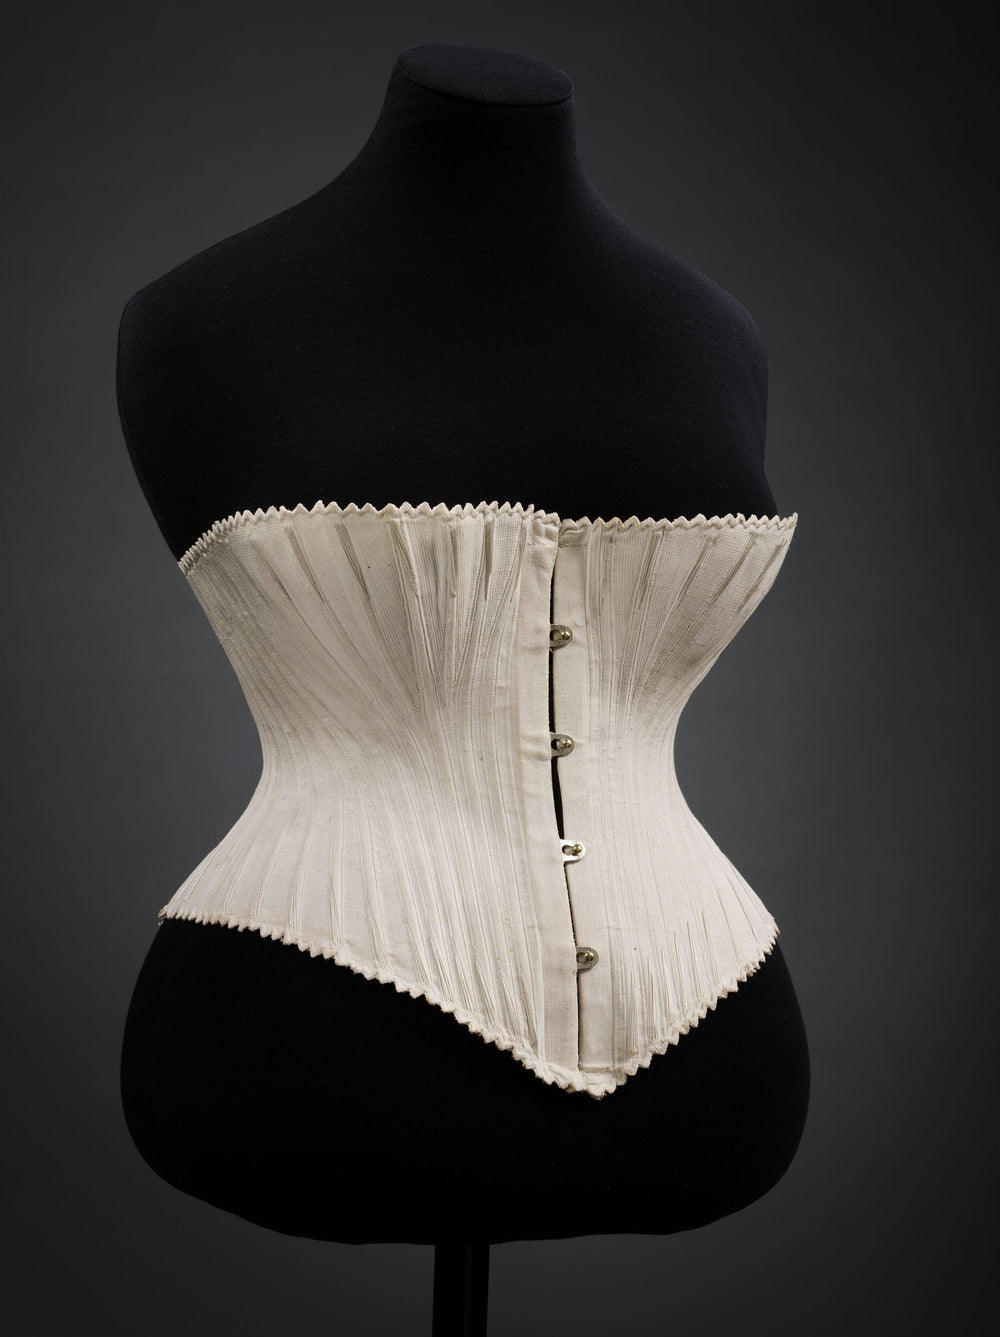 The vogue for corsets, News